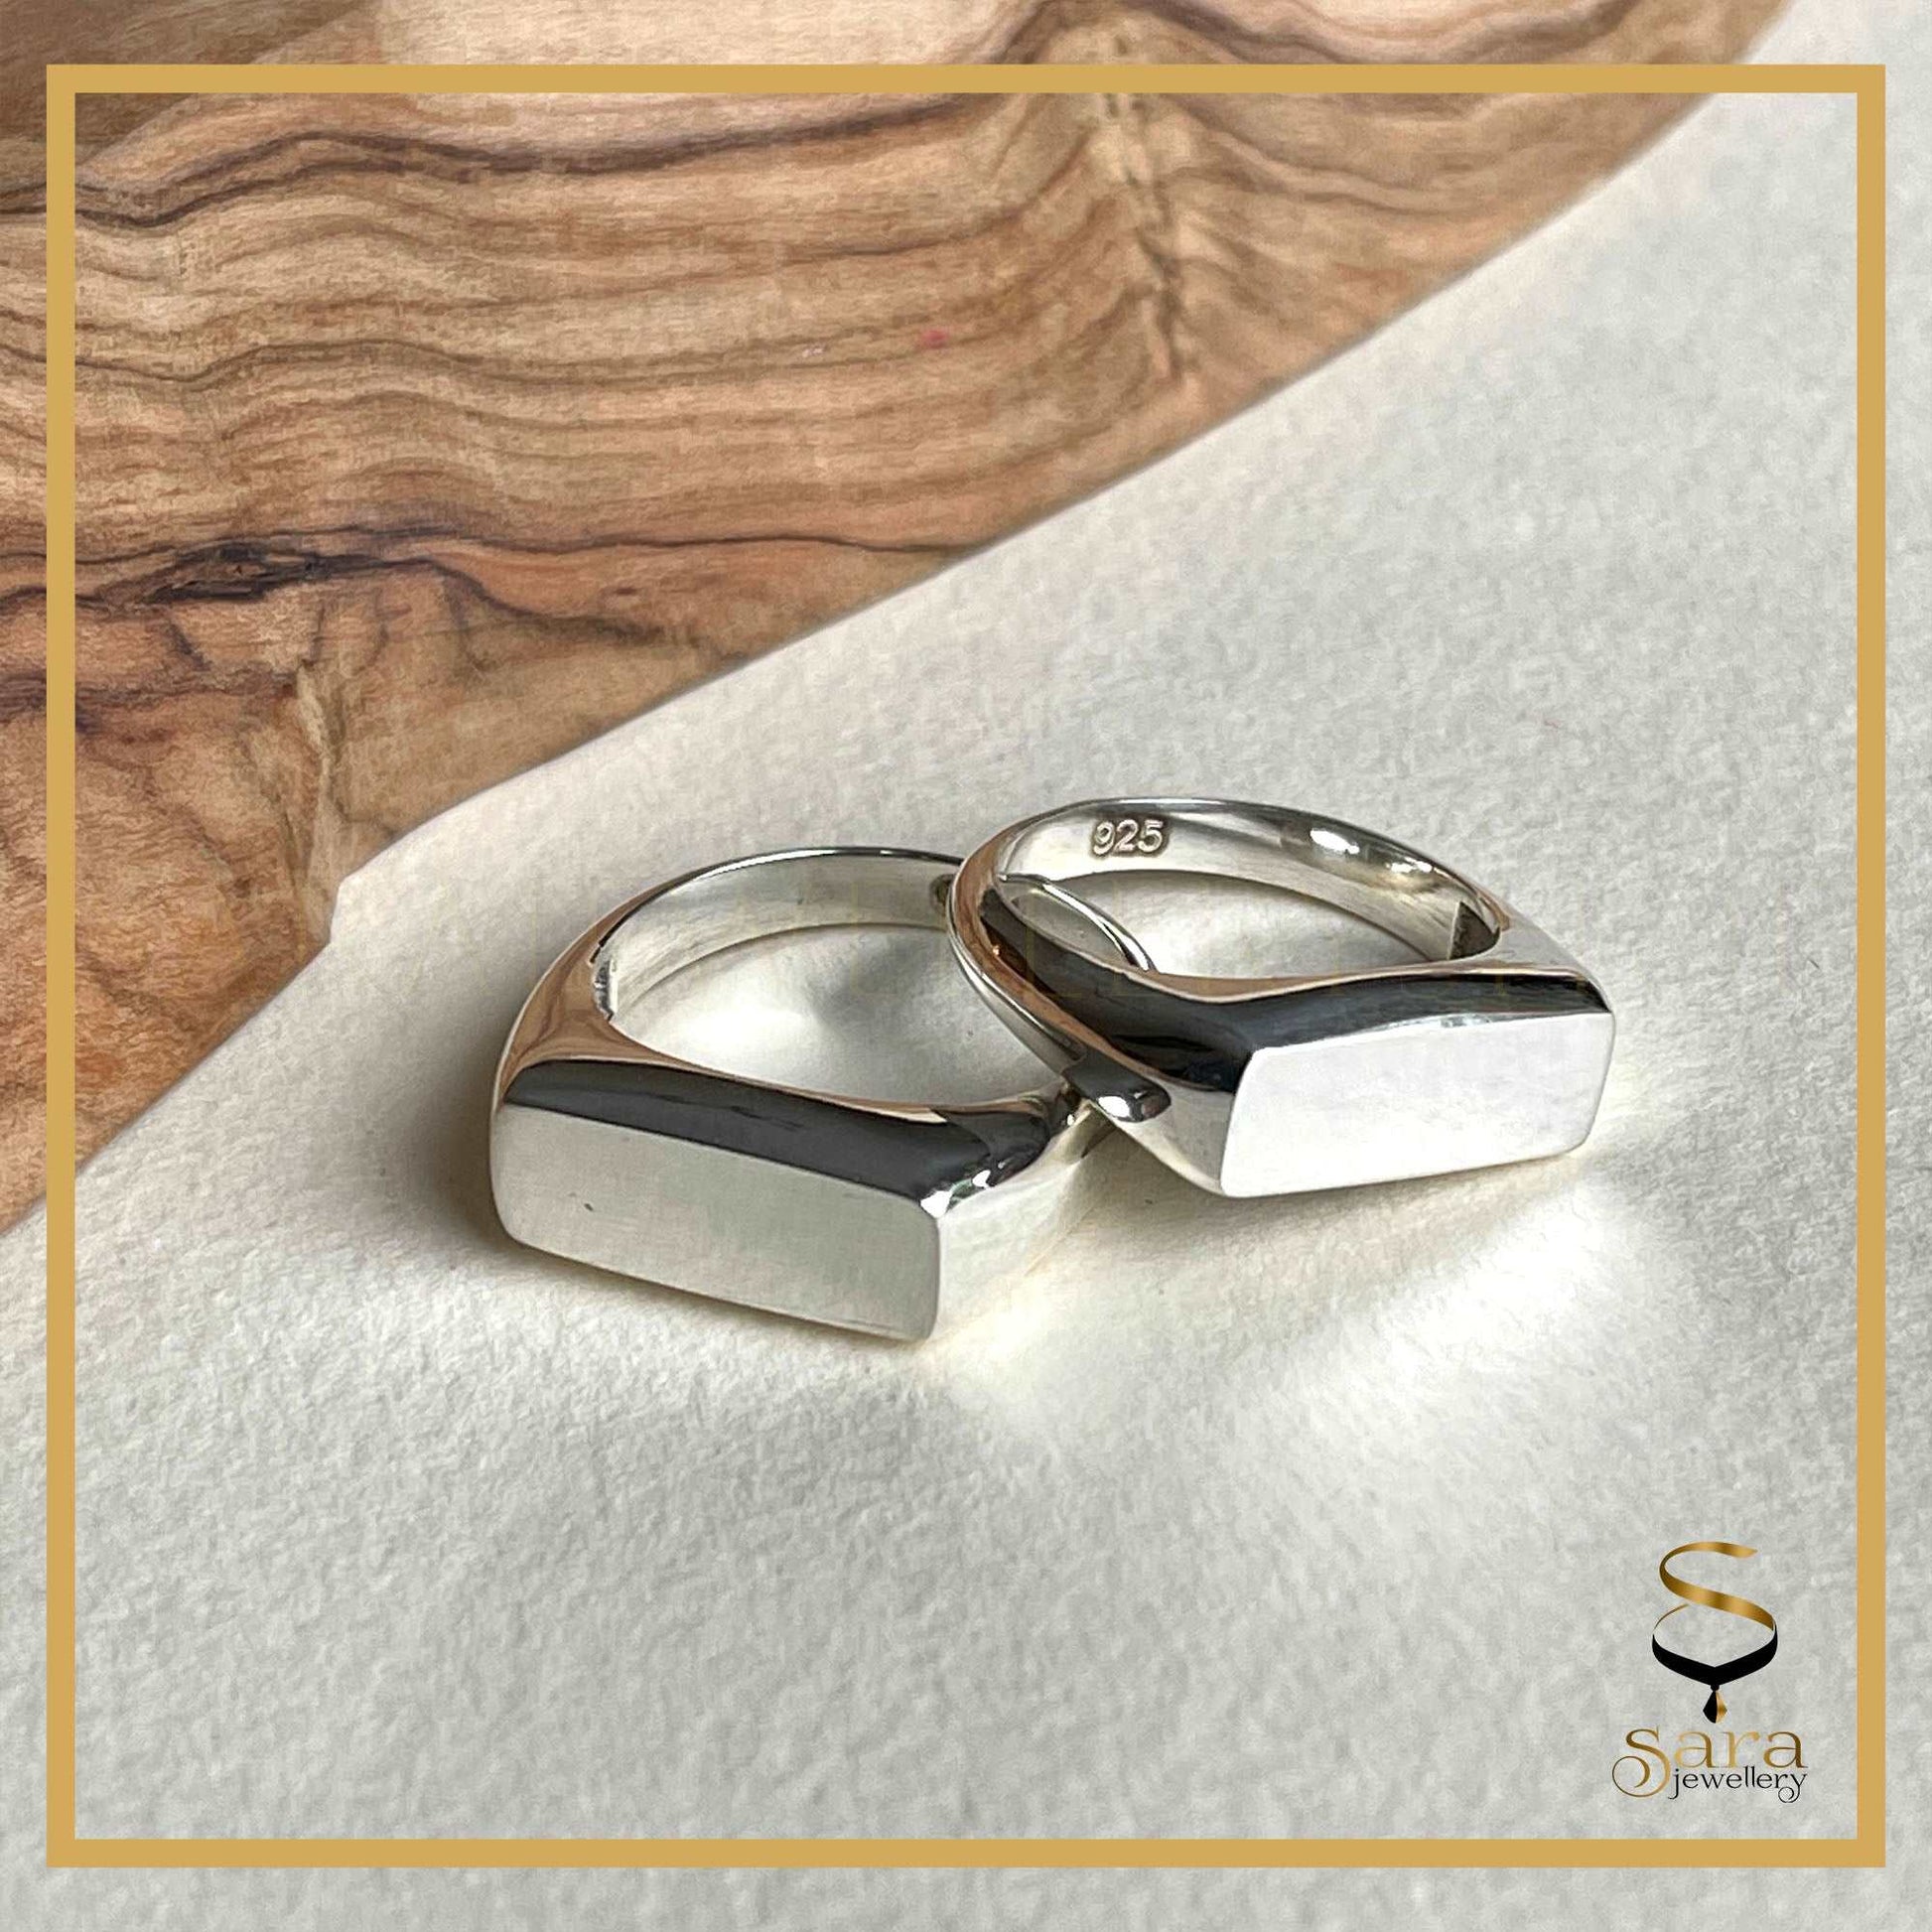 Signet ring| Sterling silver signet rings, Silver Rectangular signet rings for men and women sjewellery|sara jewellery shop toronto